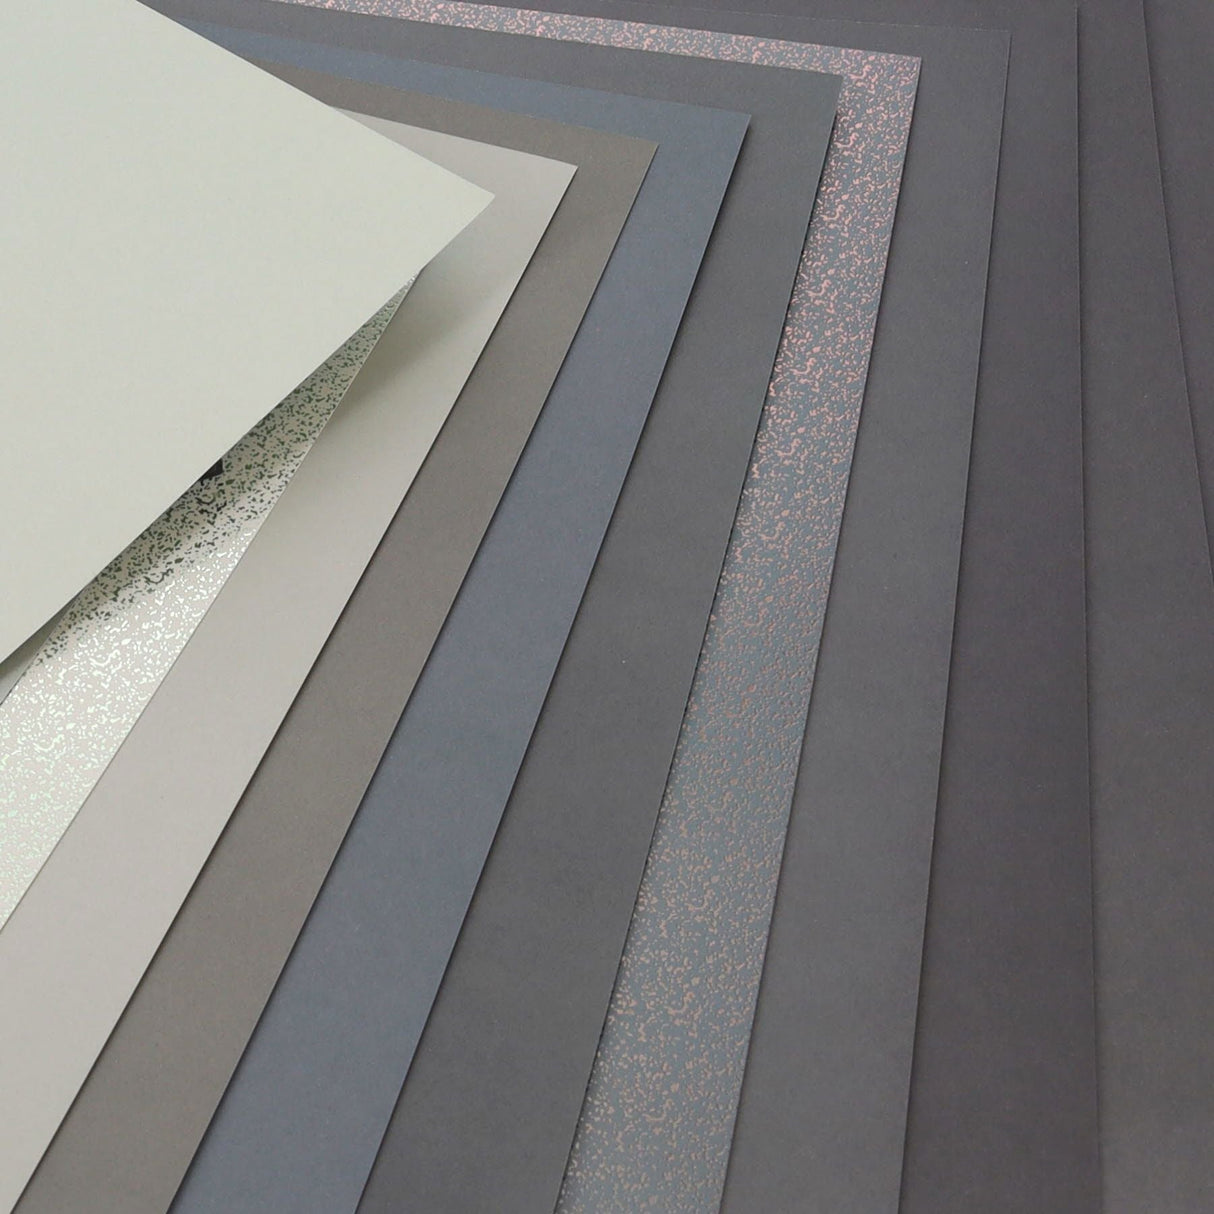 Premier Activity A4 Paper Pad - 24 Sheets - 180gsm - Shades of Silver-Craft Paper & Card-Premier|StationeryShop.co.uk